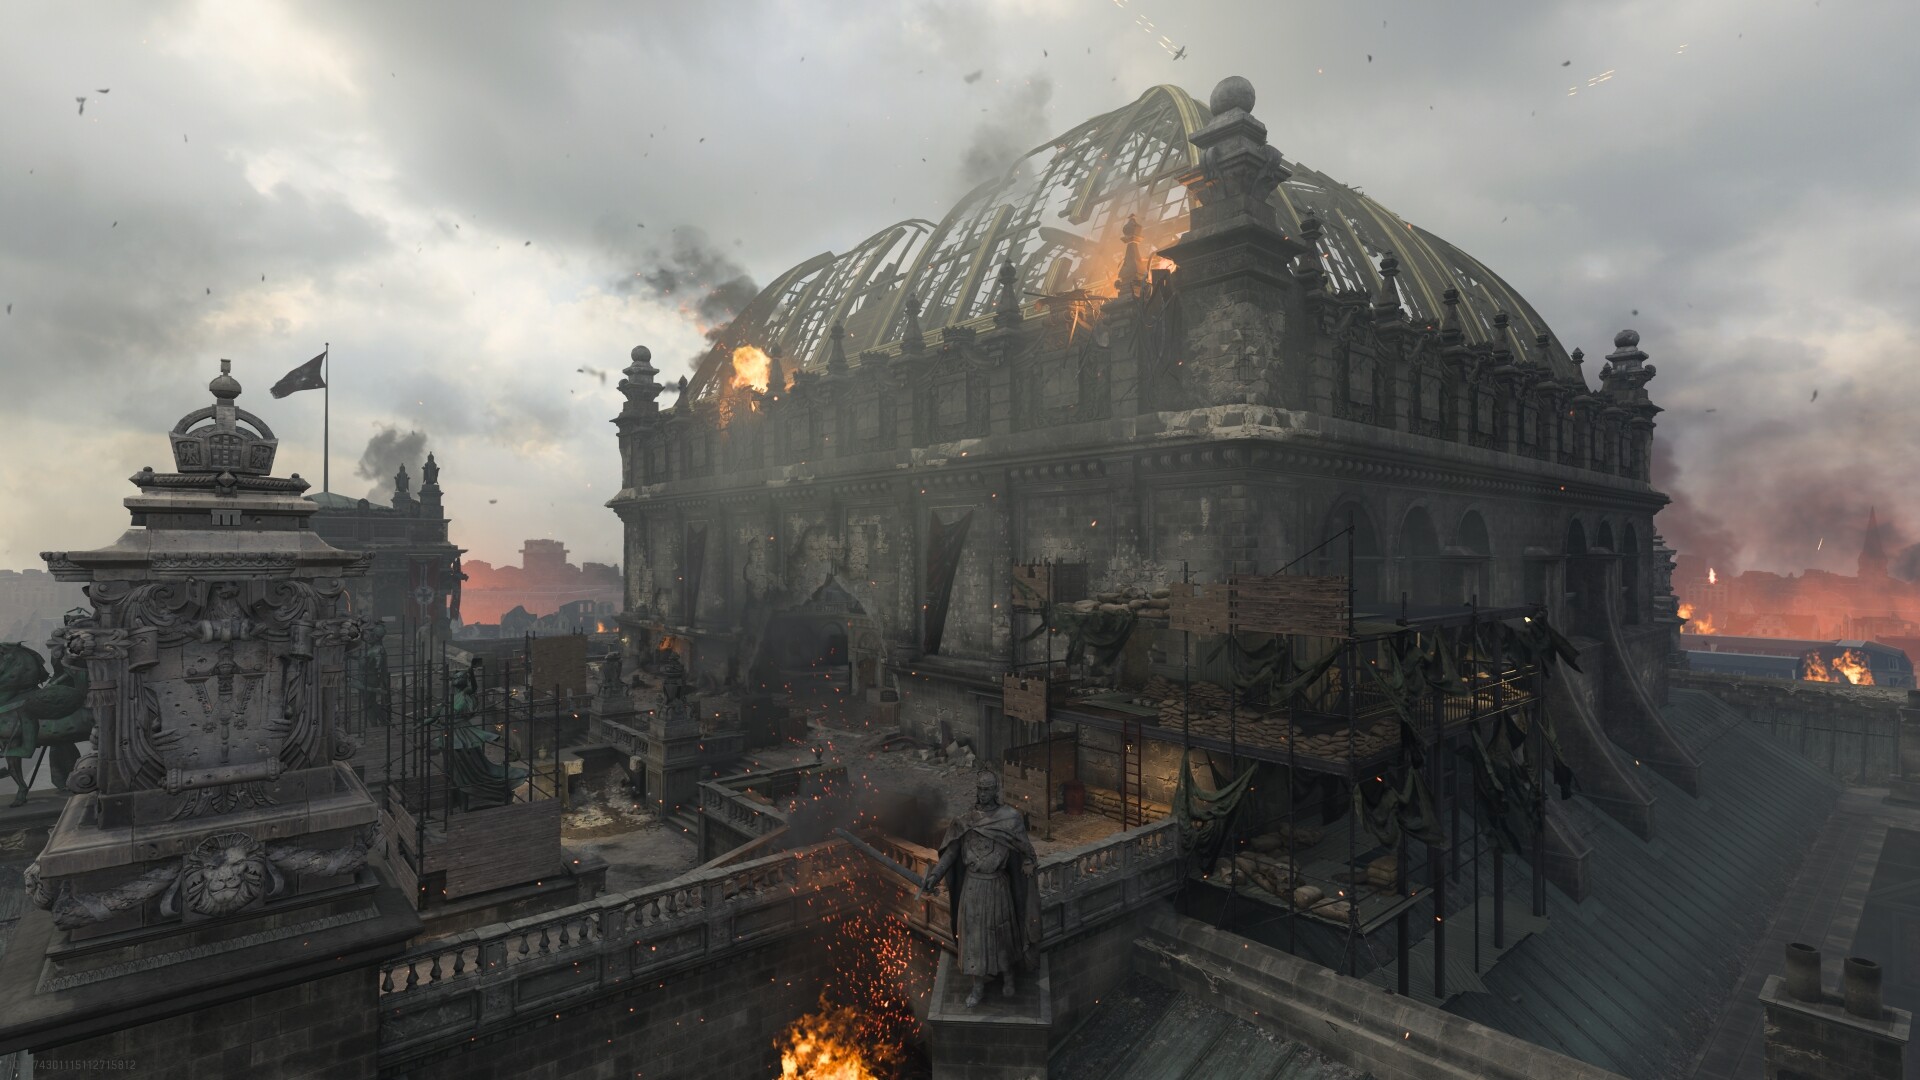 Call of Duty Vanguard maps: every map at launch